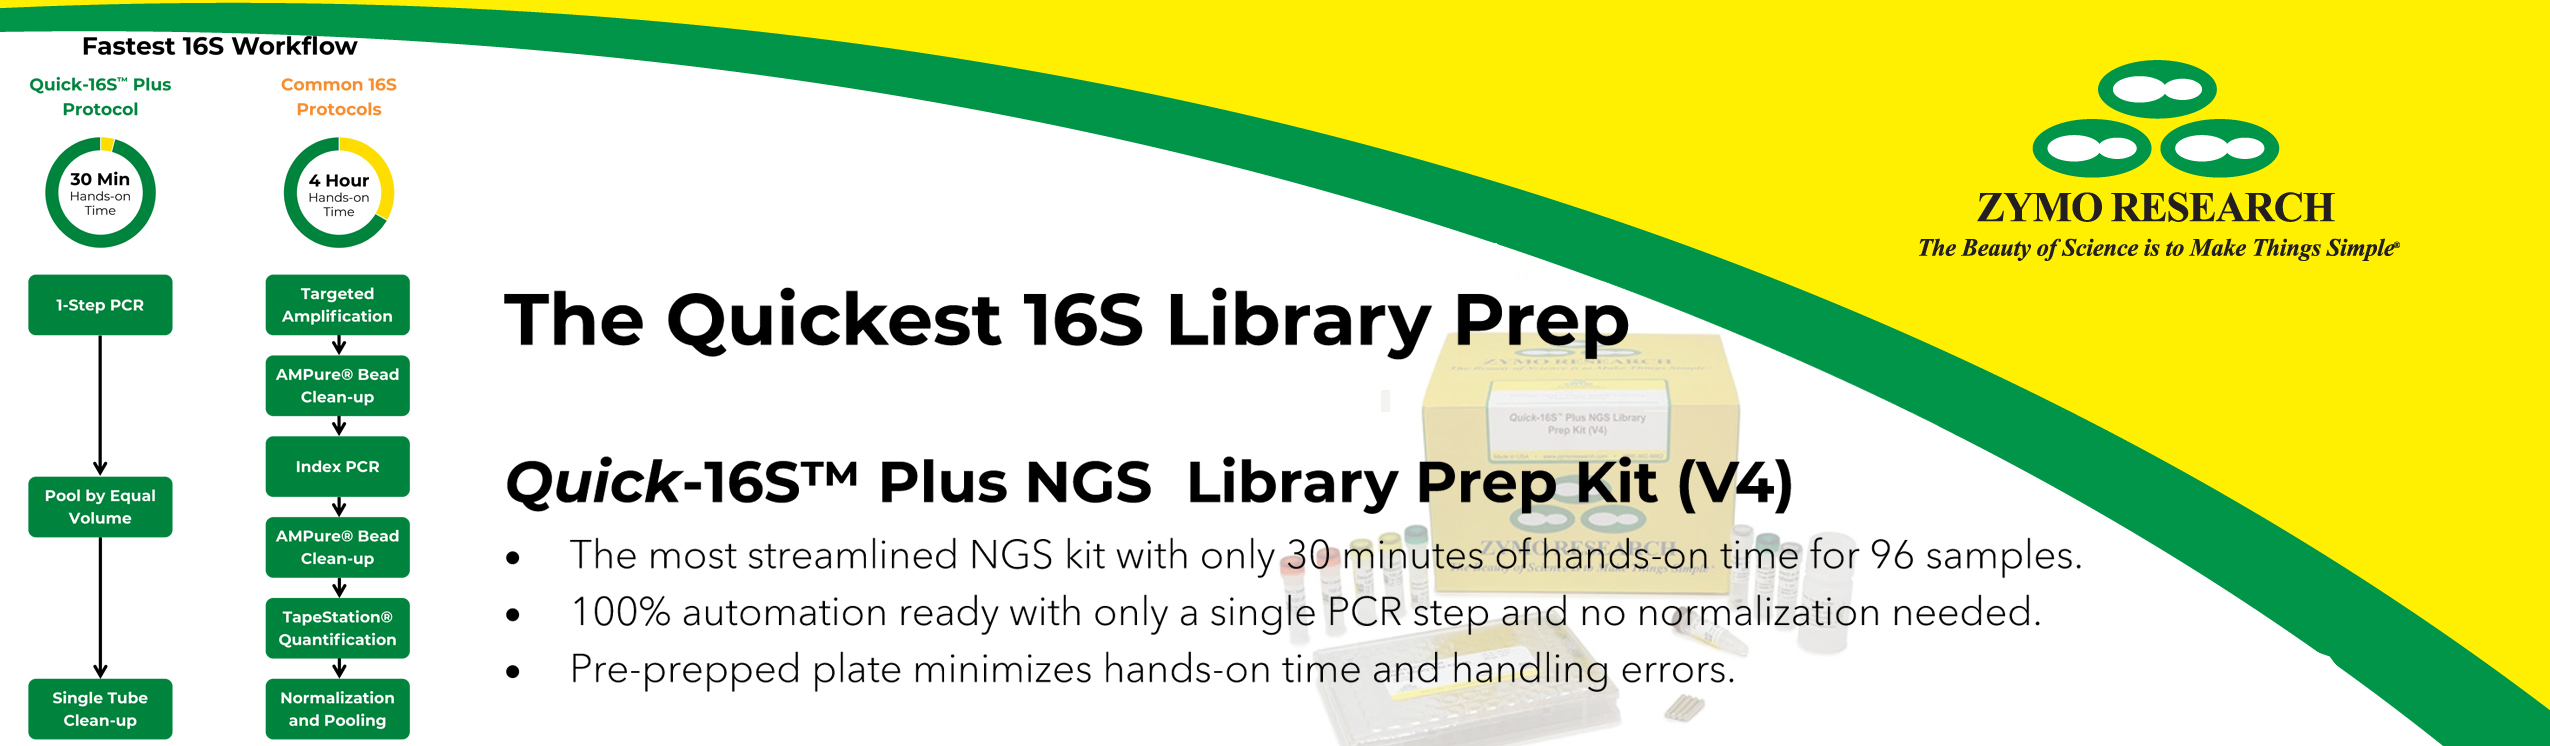 Quick-16S Plus NGS Library Prep Kit (V4)